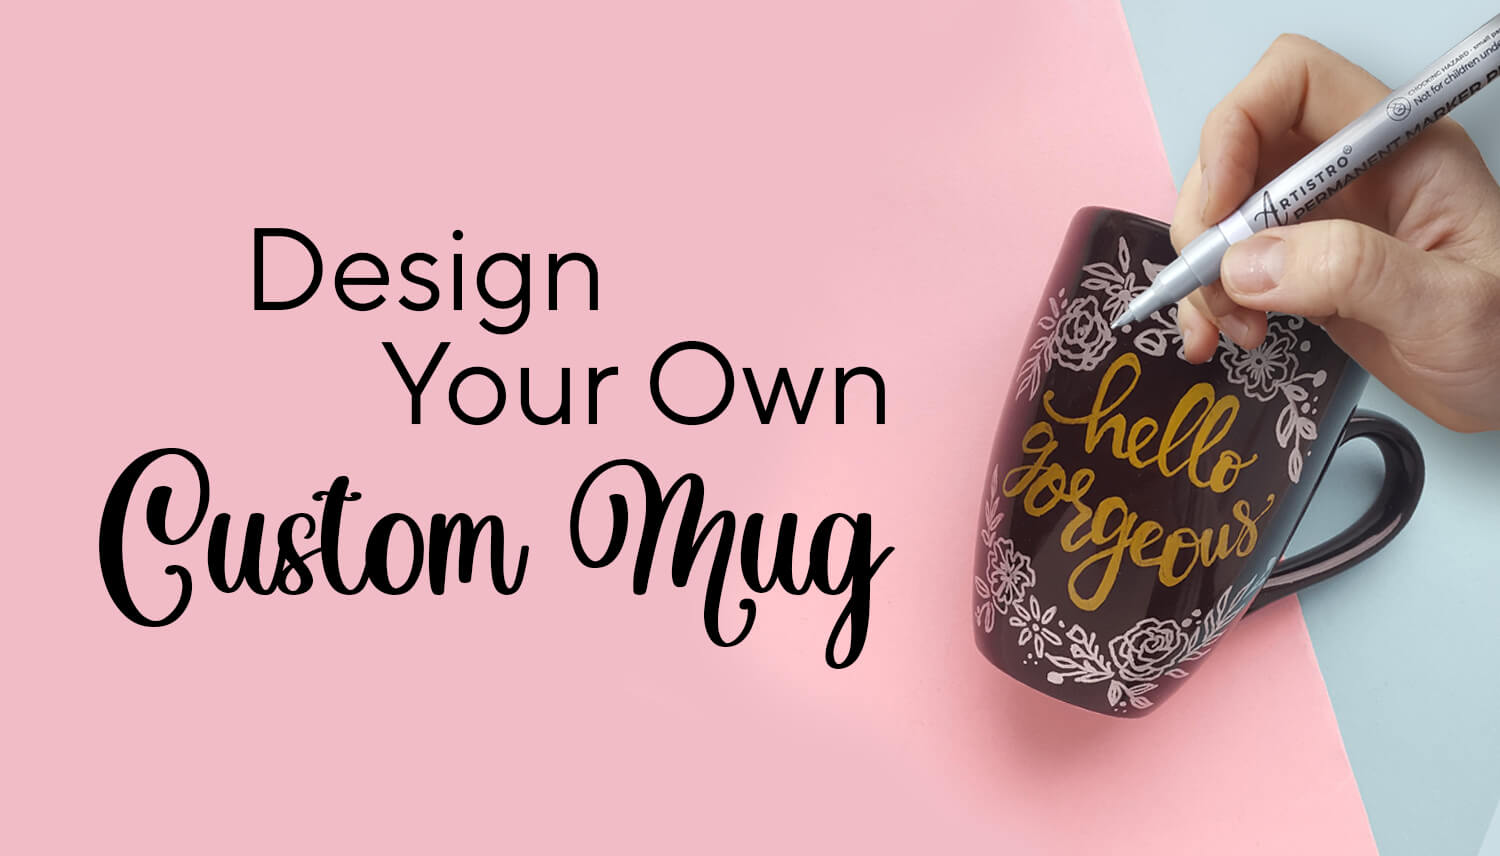 Cool Mug Painting Ideas to Customize Your Cup | Artistro